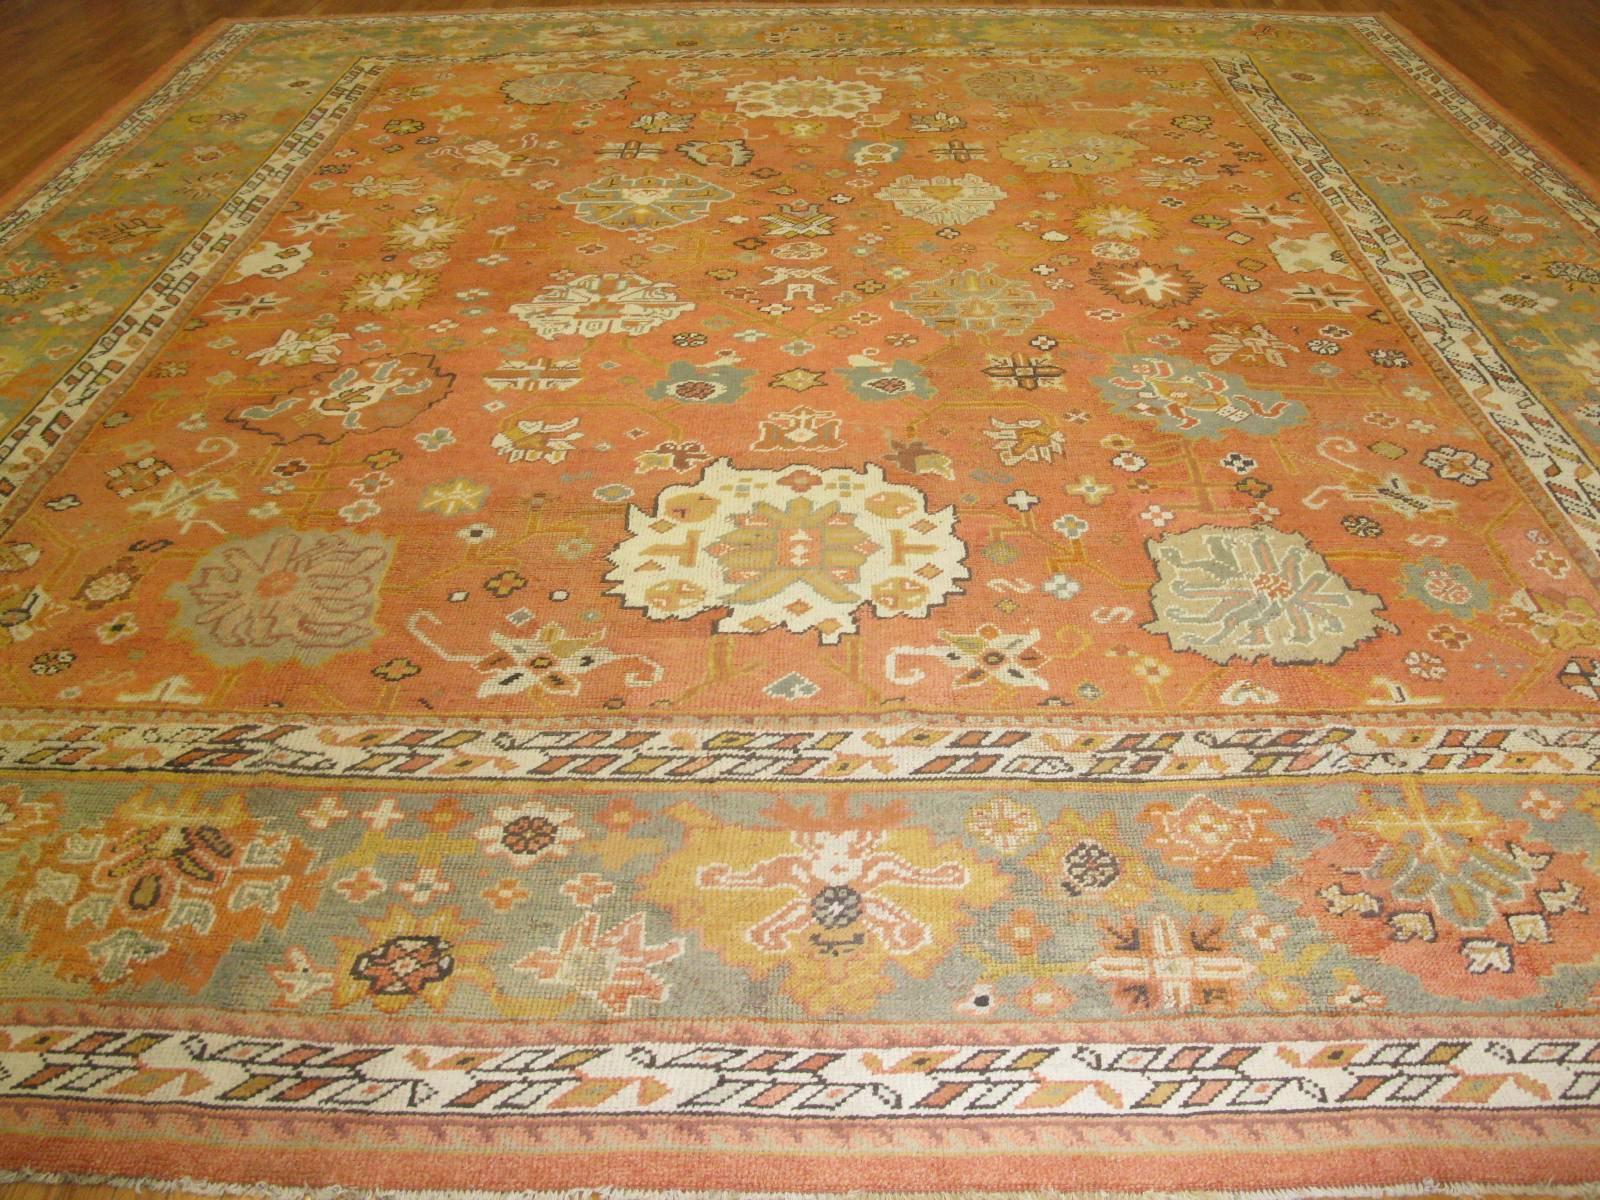 This is a beautiful genuine antique hand-knotted Turkish Oushak rug with a large-scale all-over pattern making it a very easy rug to work with. The rug measures 14' x 16' 6'' and in great condition.